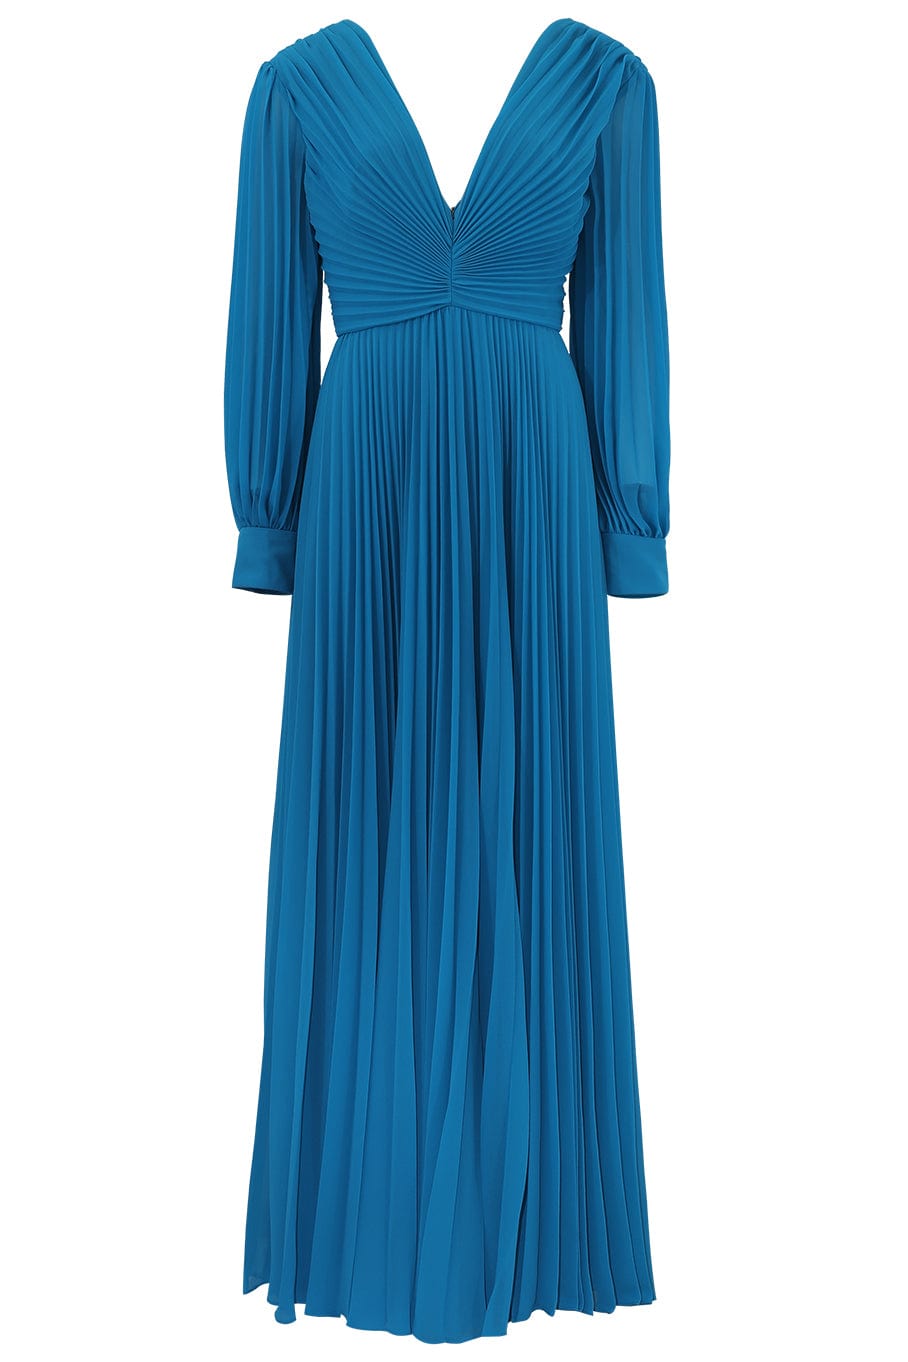 BADGLEY MISCHKA-Pleated V Neck Gown - Turquoise-